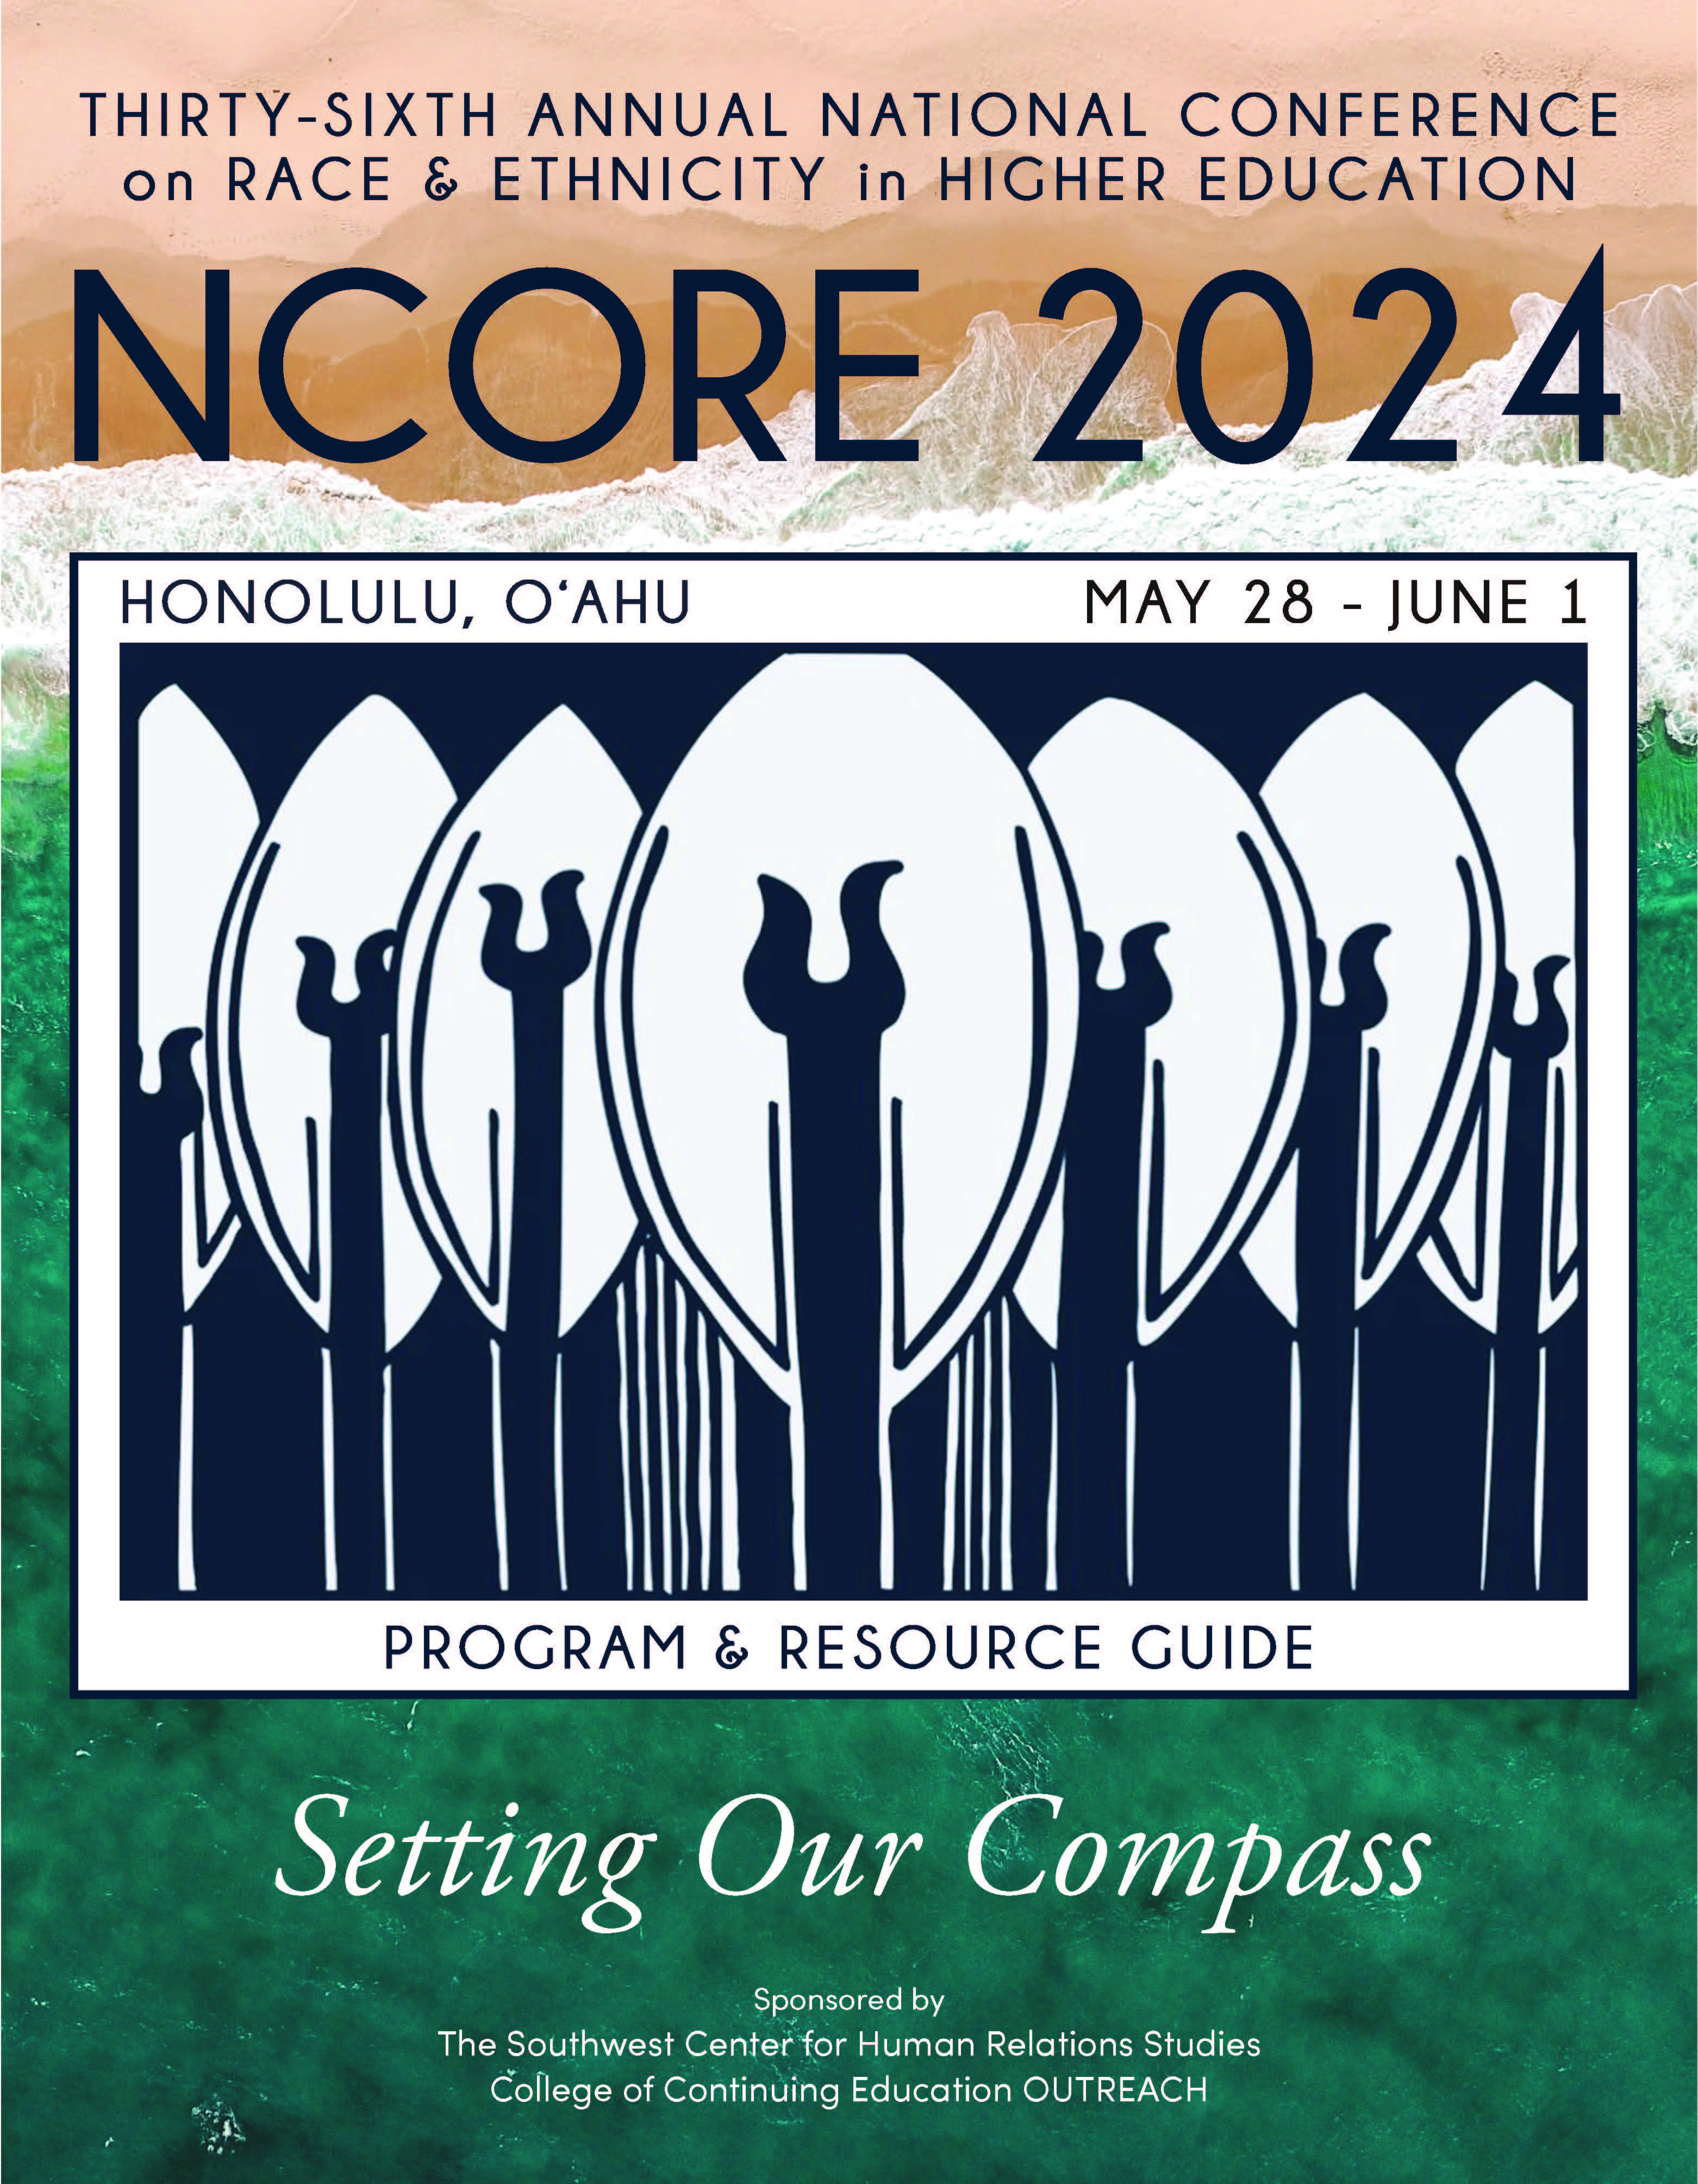 image of NCORE 2024 program guide cover